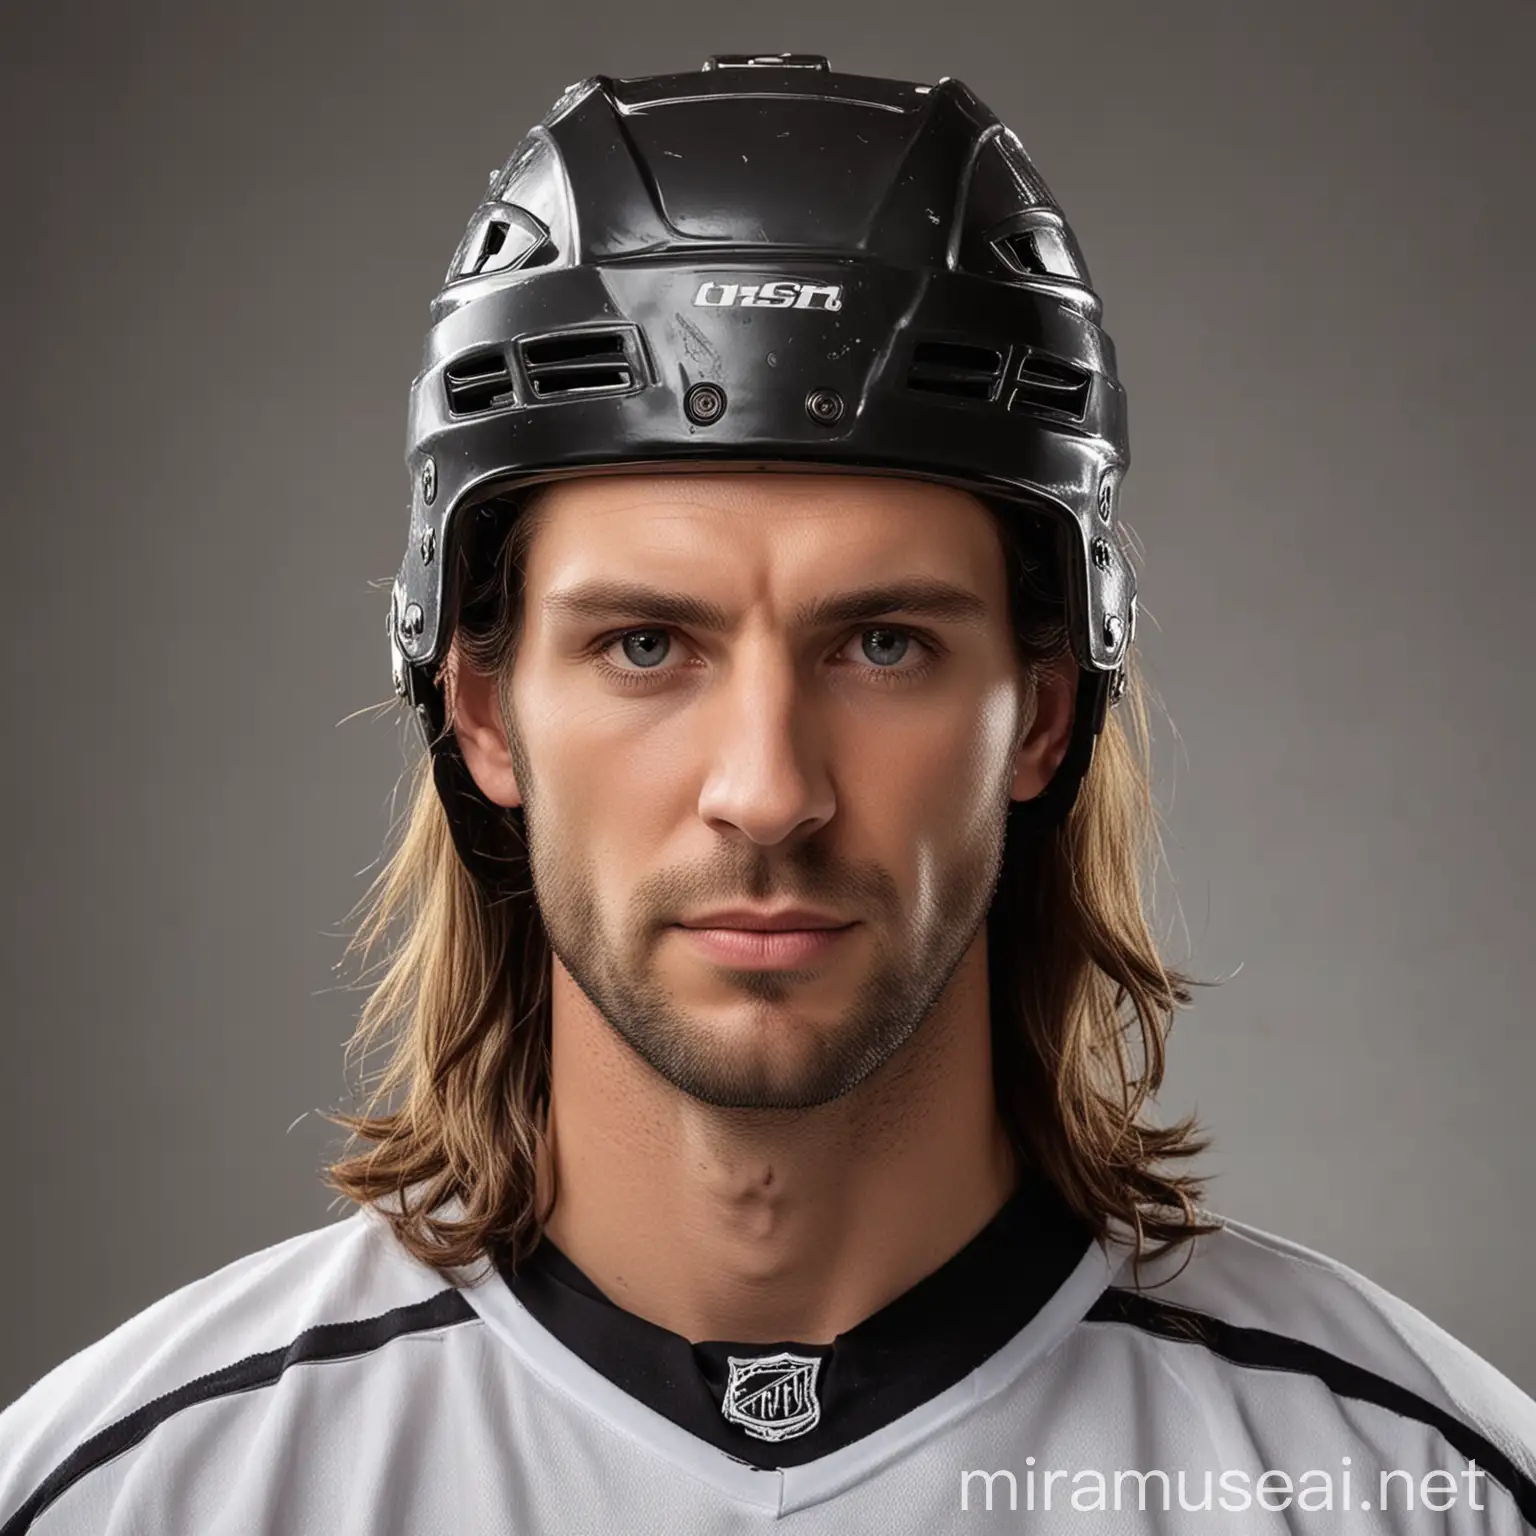 Long Hair Hockey Helmet Stylish Male Player in Action